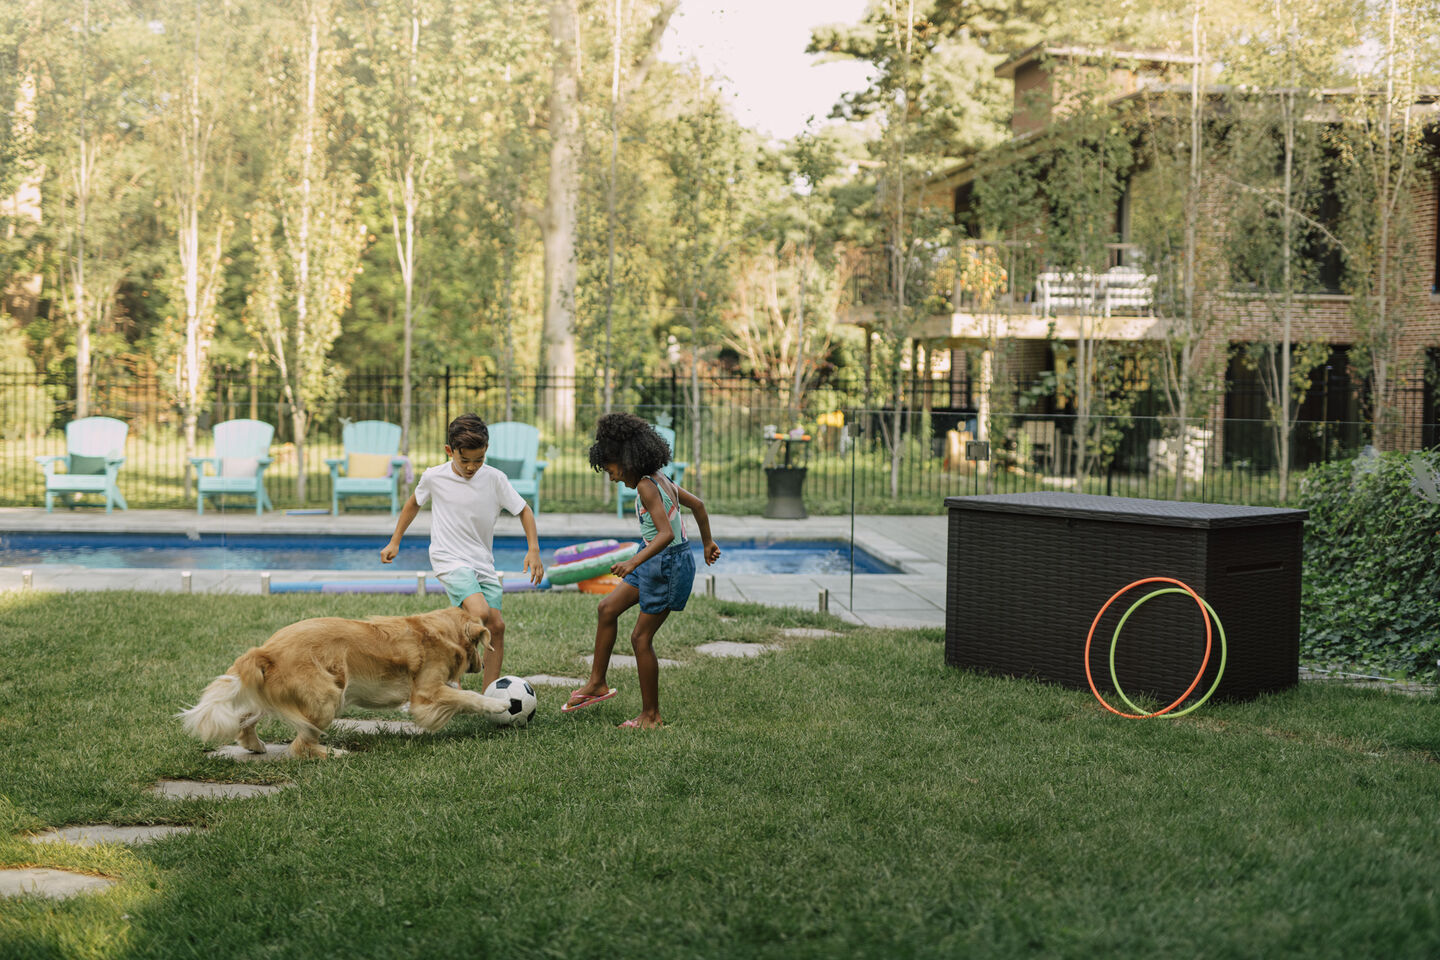 Kids playing soccer with their dog by the pool